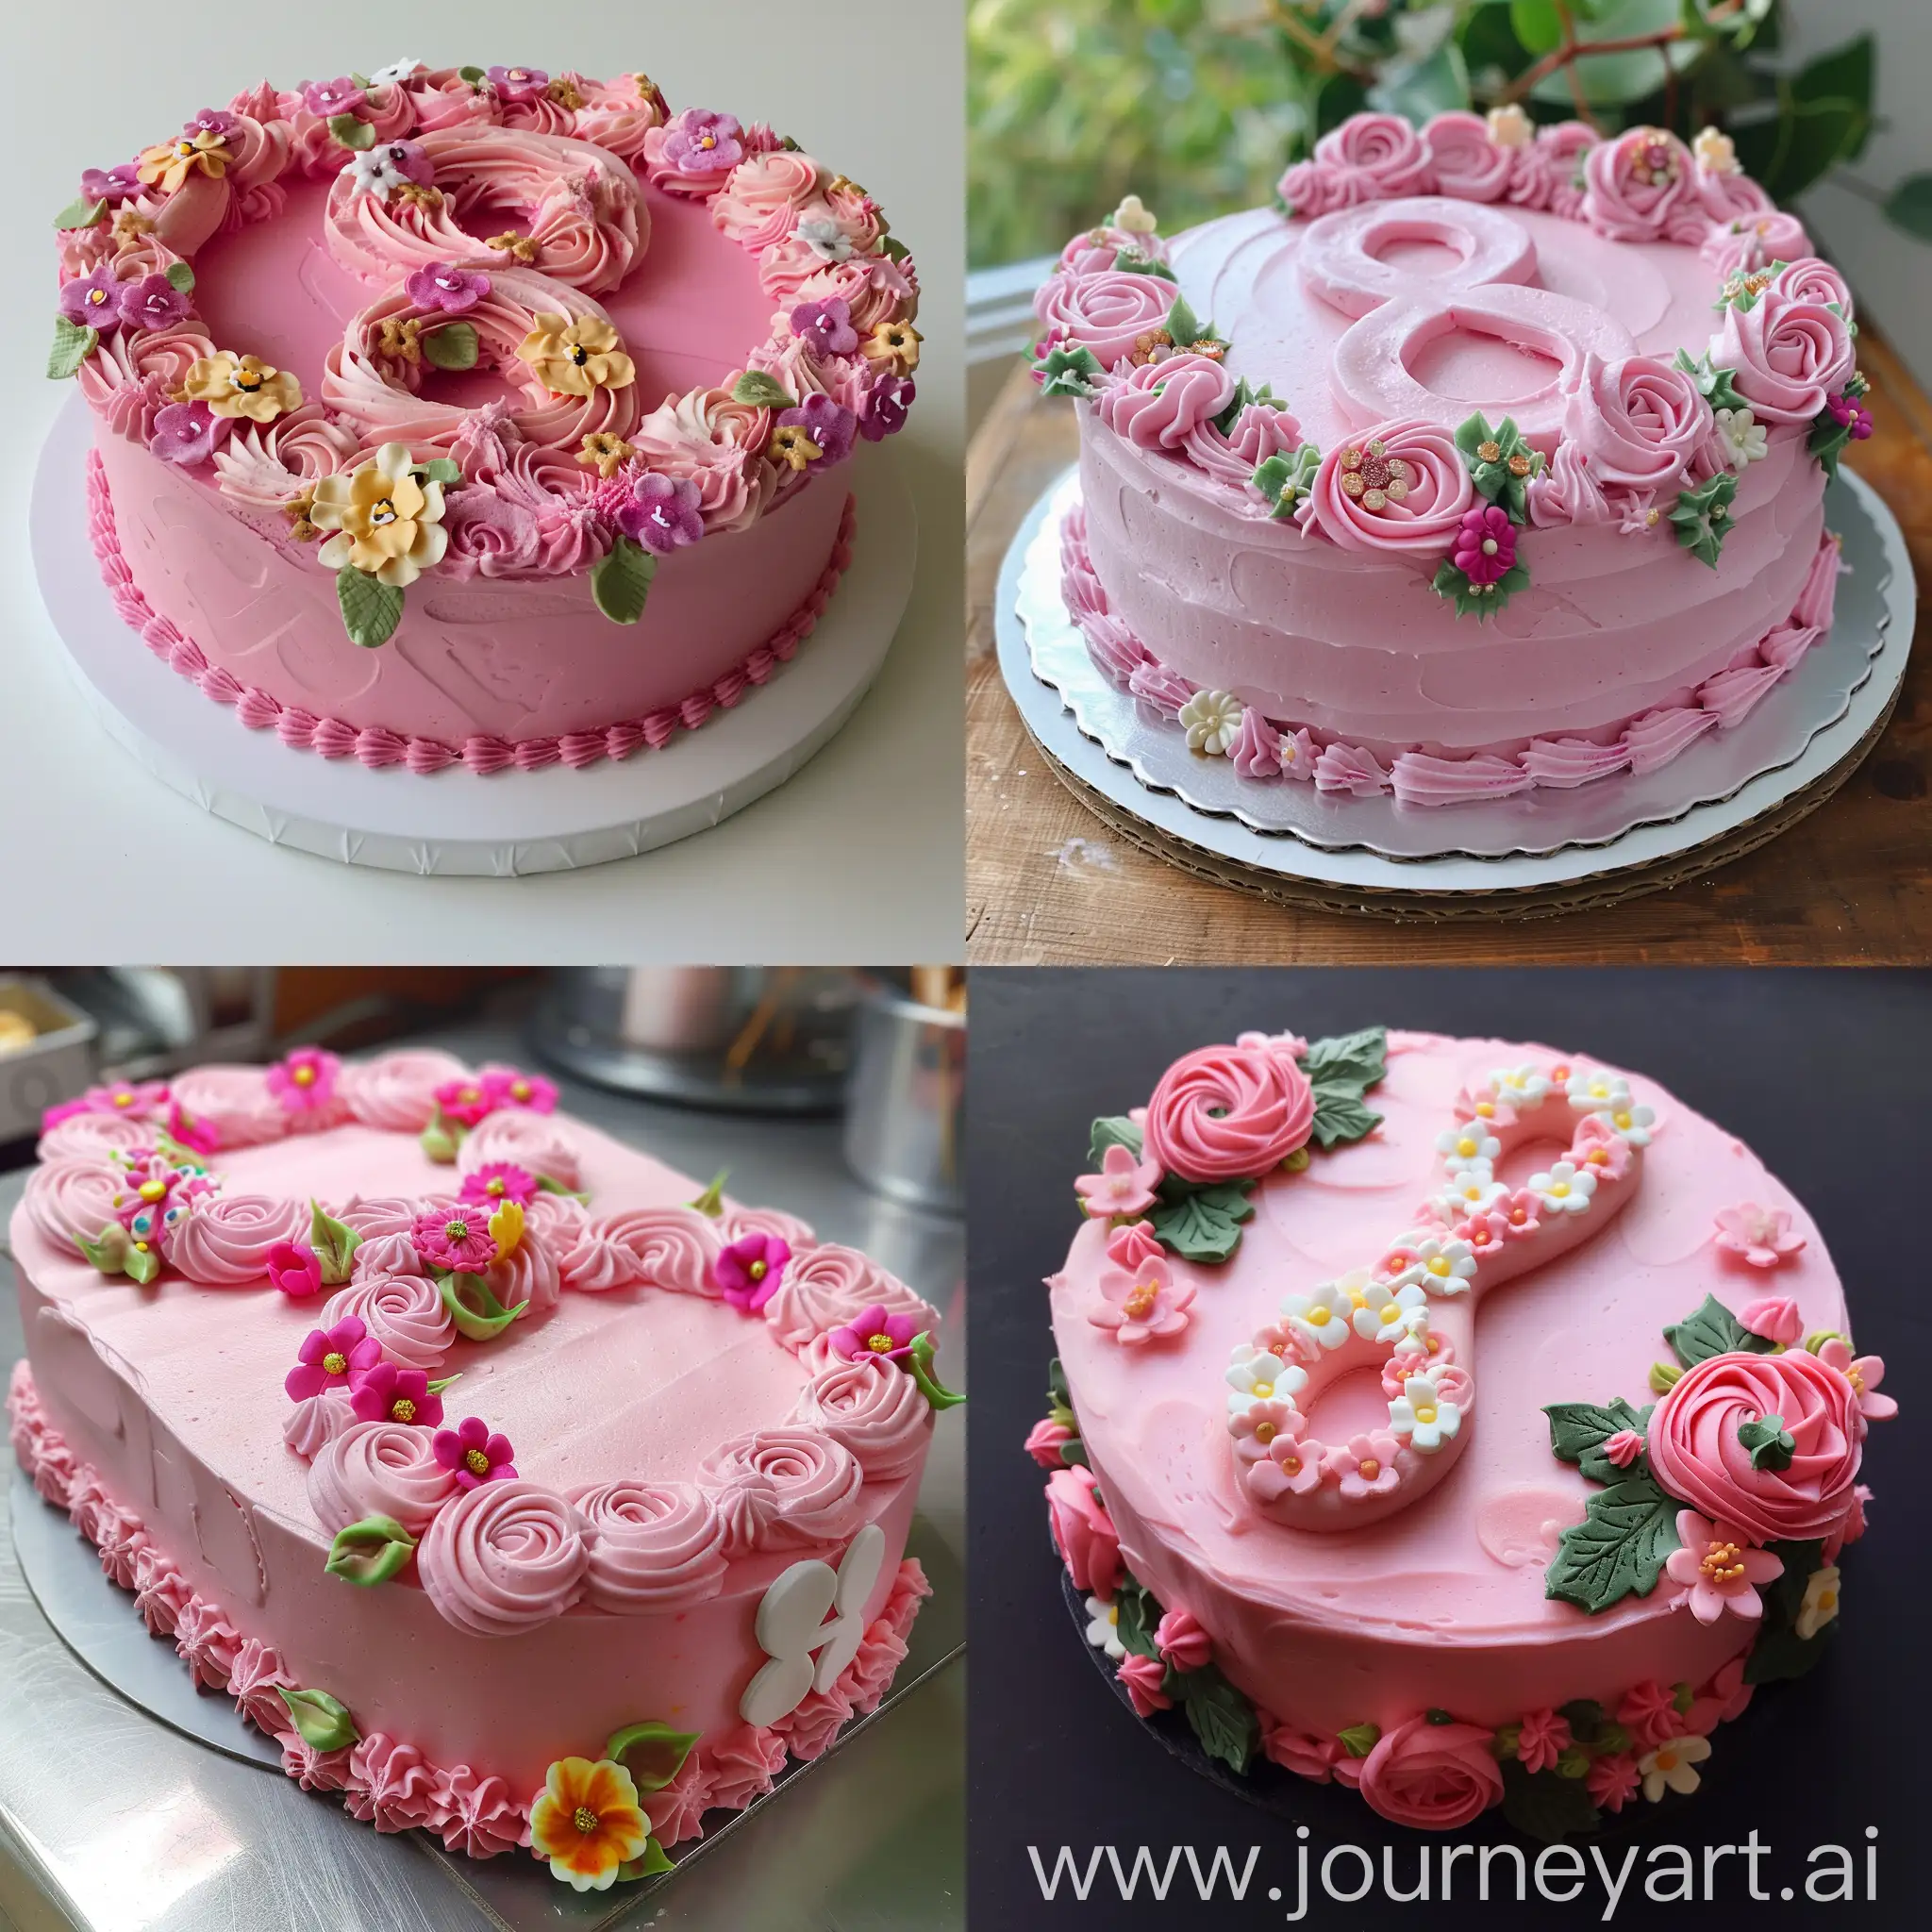 pink cake in the shape of an eight, with flower decorations, detalised